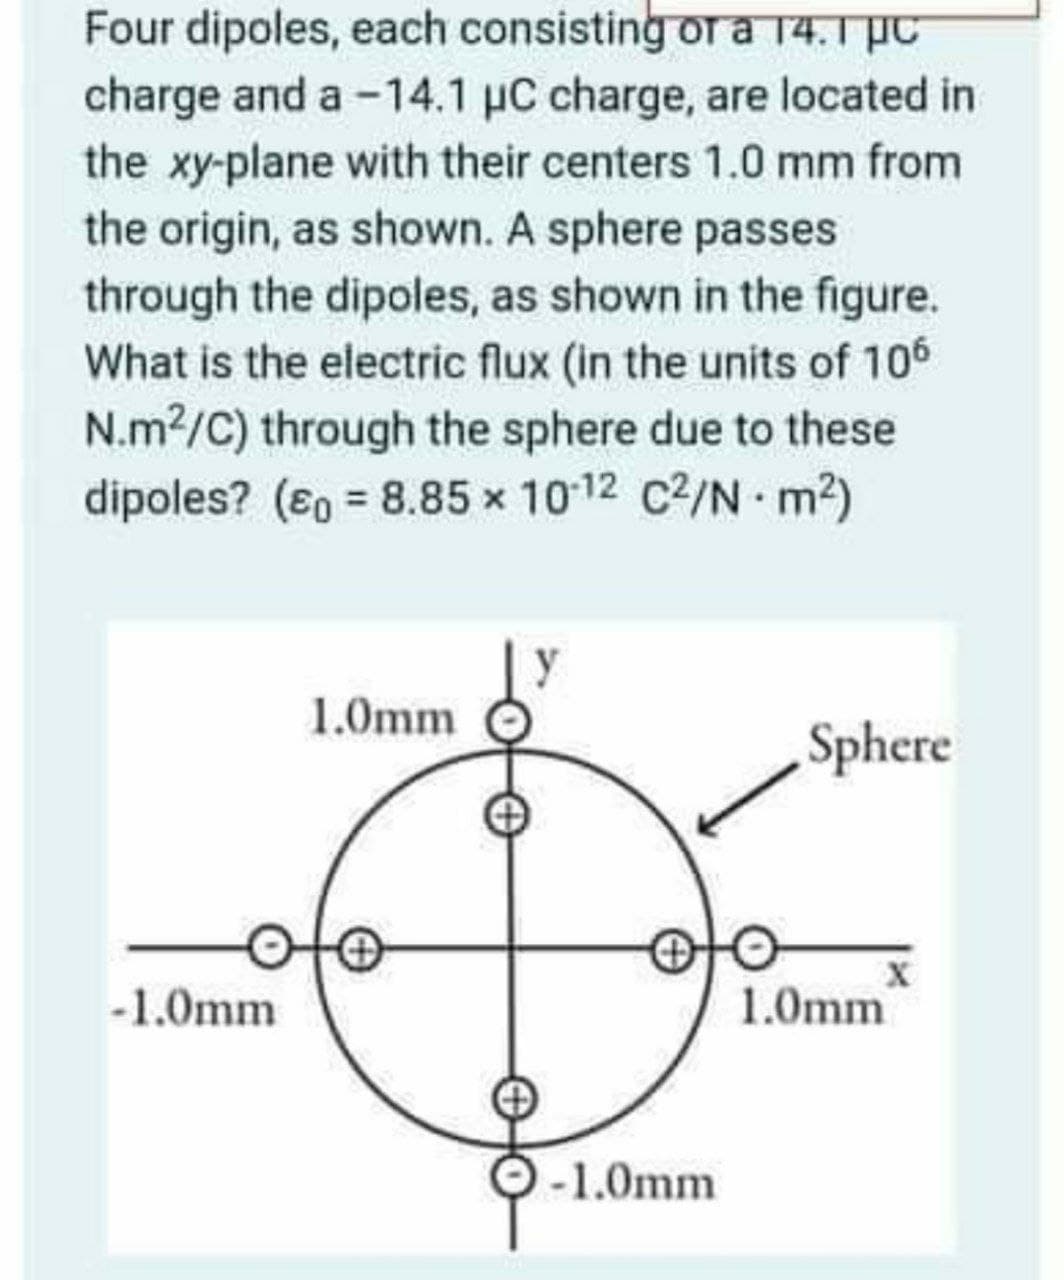 Four dipoles, each consisting or a 14.1 pc
charge and a -14.1 pC charge, are located in
the xy-plane with their centers 1.0 mm from
the origin, as shown. A sphere passes
through the dipoles, as shown in the figure.
What is the electric flux (in the units of 106
N.m2/C) through the sphere due to these
dipoles? (80 = 8.85 x 1012 c2/N m²)
%3D
1.0mm
Sphere
-1.0mm
1.0mm
-1.0mm
